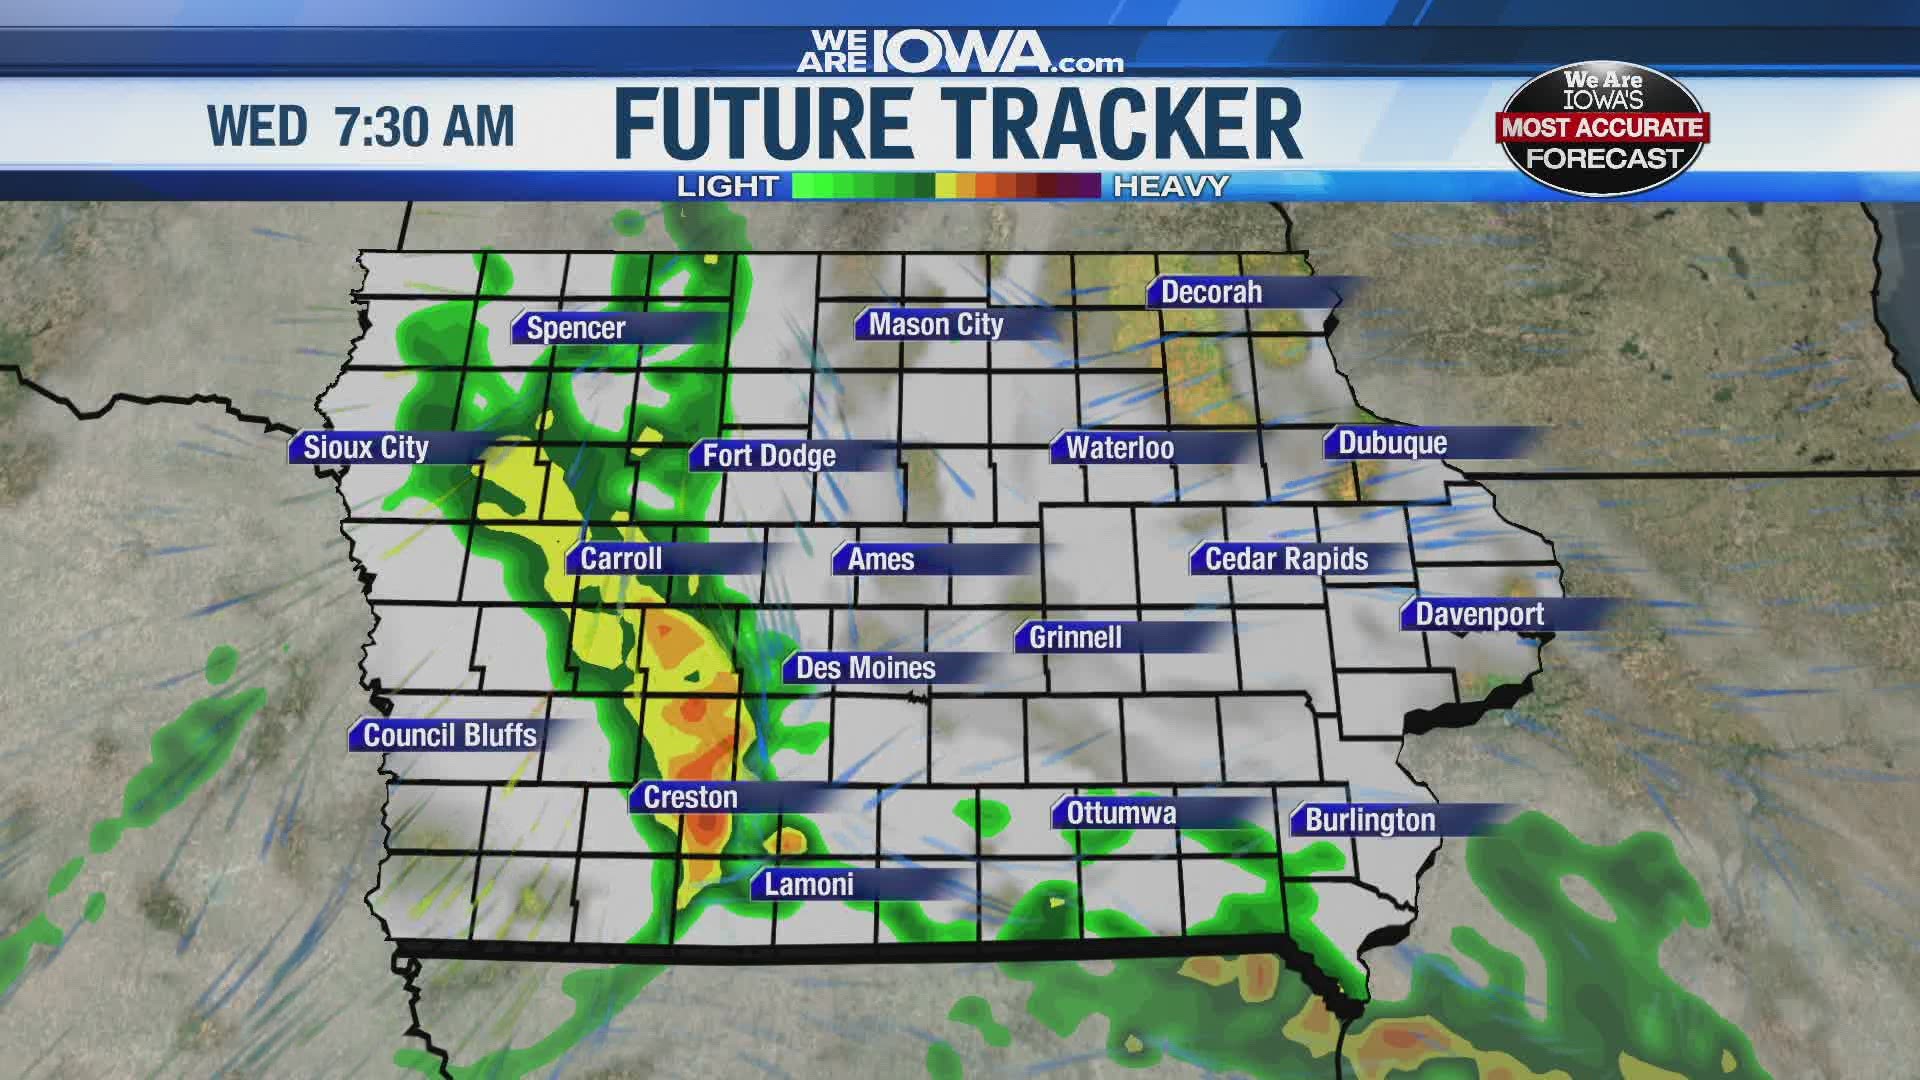 Storms return to central Iowa late tonight into Wednesday morning